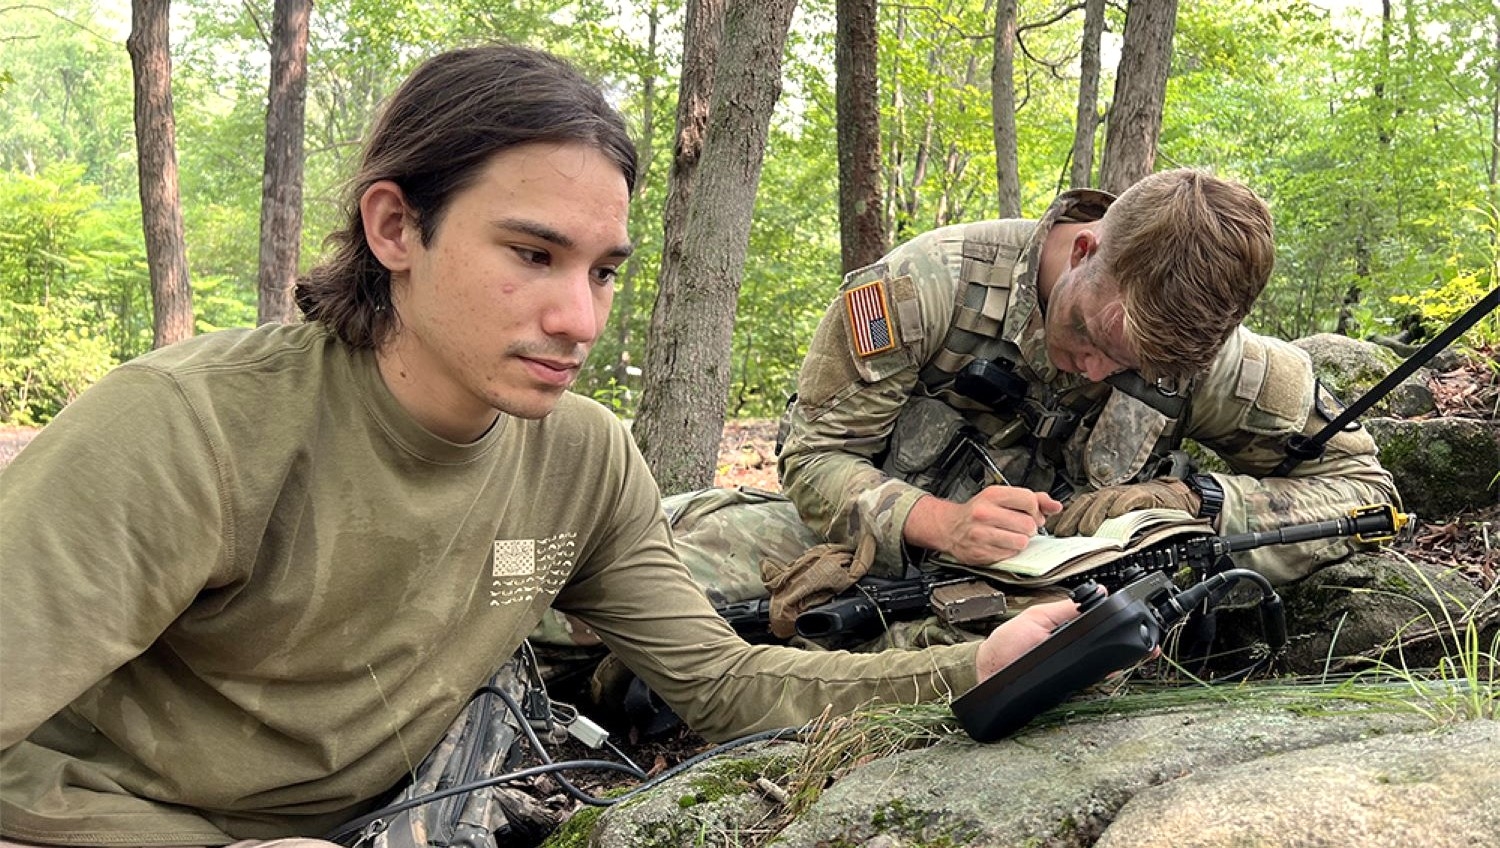 Psychology major Trevor Patten doing fieldwork with a cadet during a West Point training session.